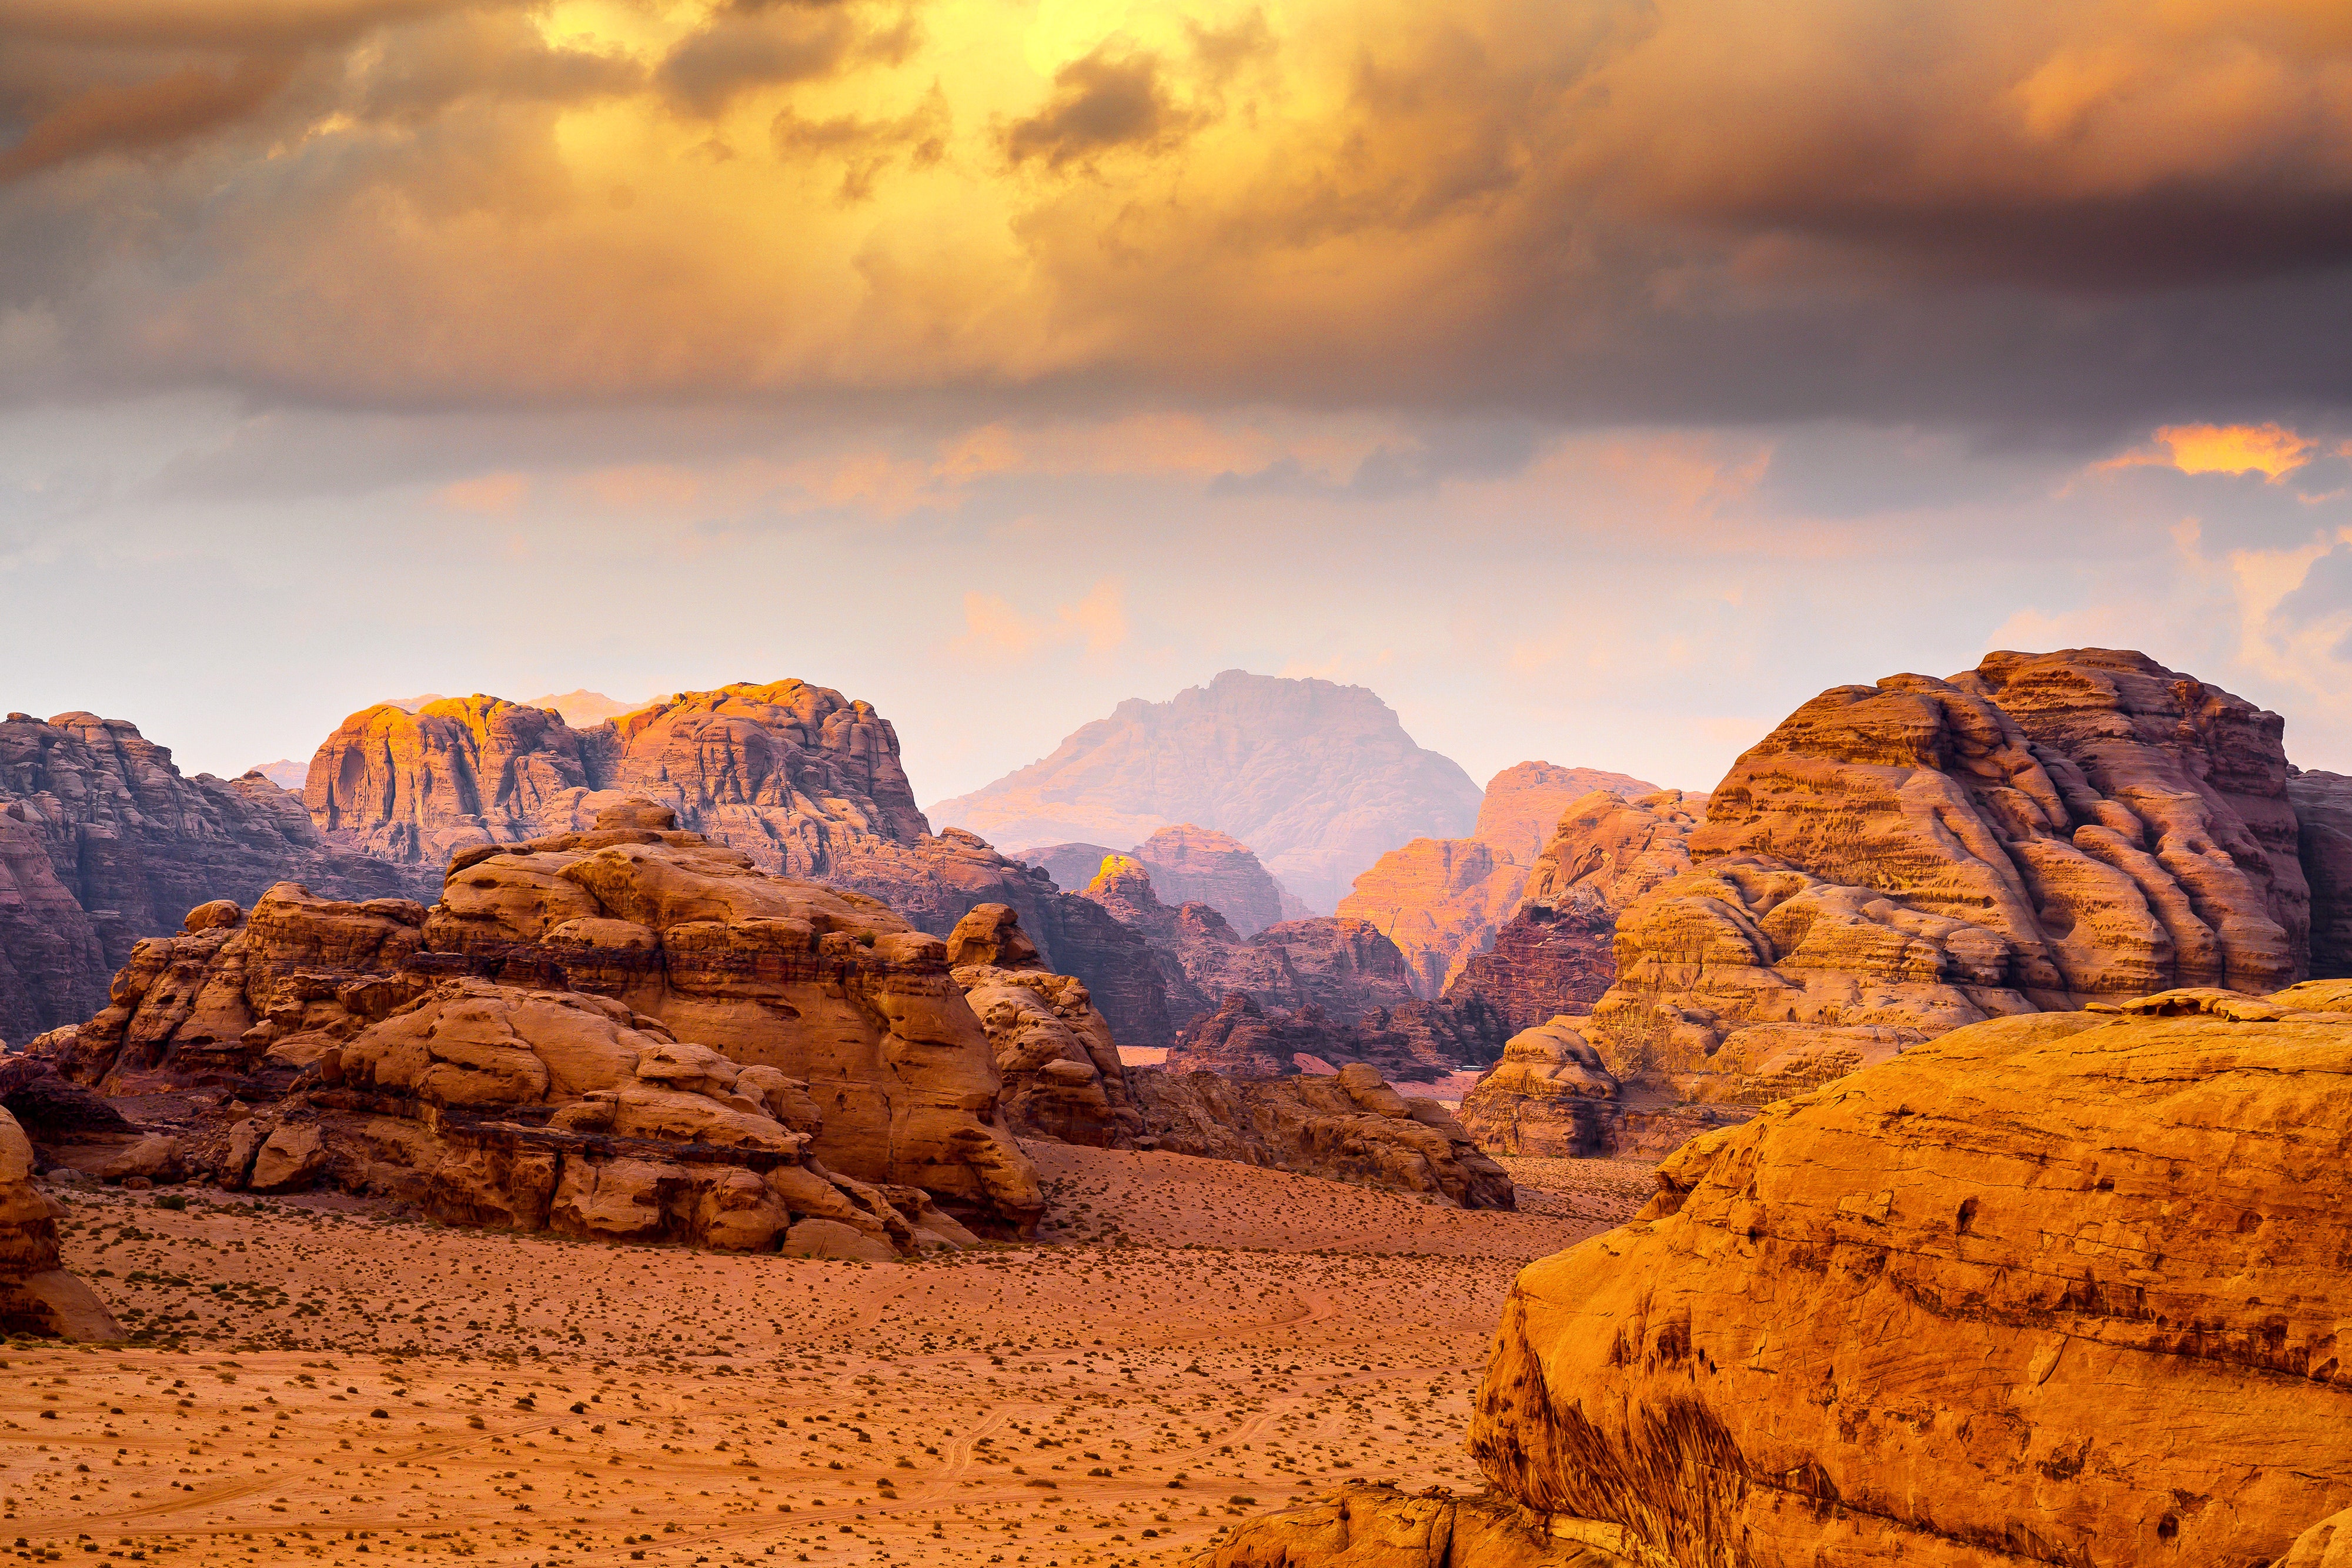 With its cliffs, caverns, natural arches, and Mars-like red sand, it’s no wonder Wadi Rum is so beloved by both tourists and directors. (<em>Lawrence of Arabia,</em> <a href="http://www.cntraveler.com/stories/2015-10-02/the-martian-comes-to-earth-filming-locations-for-the-red-planet?mbid=synd_msn_rss&utm_source=msn&utm_medium=syndication"><em>The Martian</em></a>, and <a href="https://www.cntraveler.com/gallery/6-star-wars-rogue-one-filming-locations-you-can-visit-right-now?mbid=synd_msn_rss&utm_source=msn&utm_medium=syndication"><em>Rogue One</em></a> are just some of the many movies that have been filmed here.) The site is just as stunning at night, when the sky transforms into an incomparable blanket of stars.<p>Sign up to receive the latest news, expert tips, and inspiration on all things travel</p><a href="https://www.cntraveler.com/newsletter/the-daily?sourceCode=msnsend">Inspire Me</a>